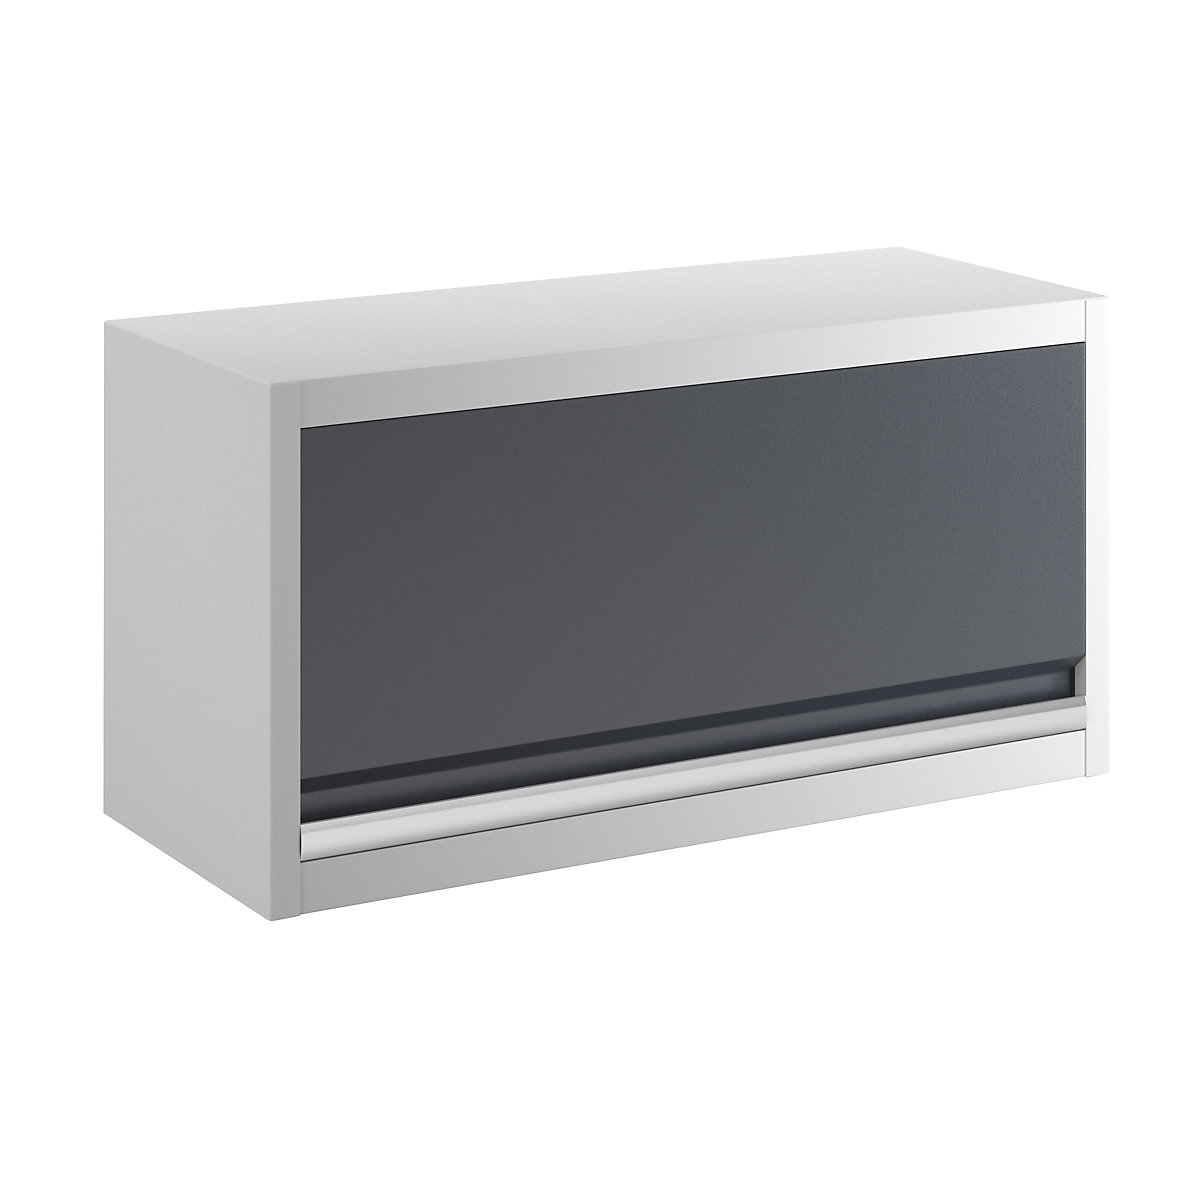 Wall mounted cupboard with front flap